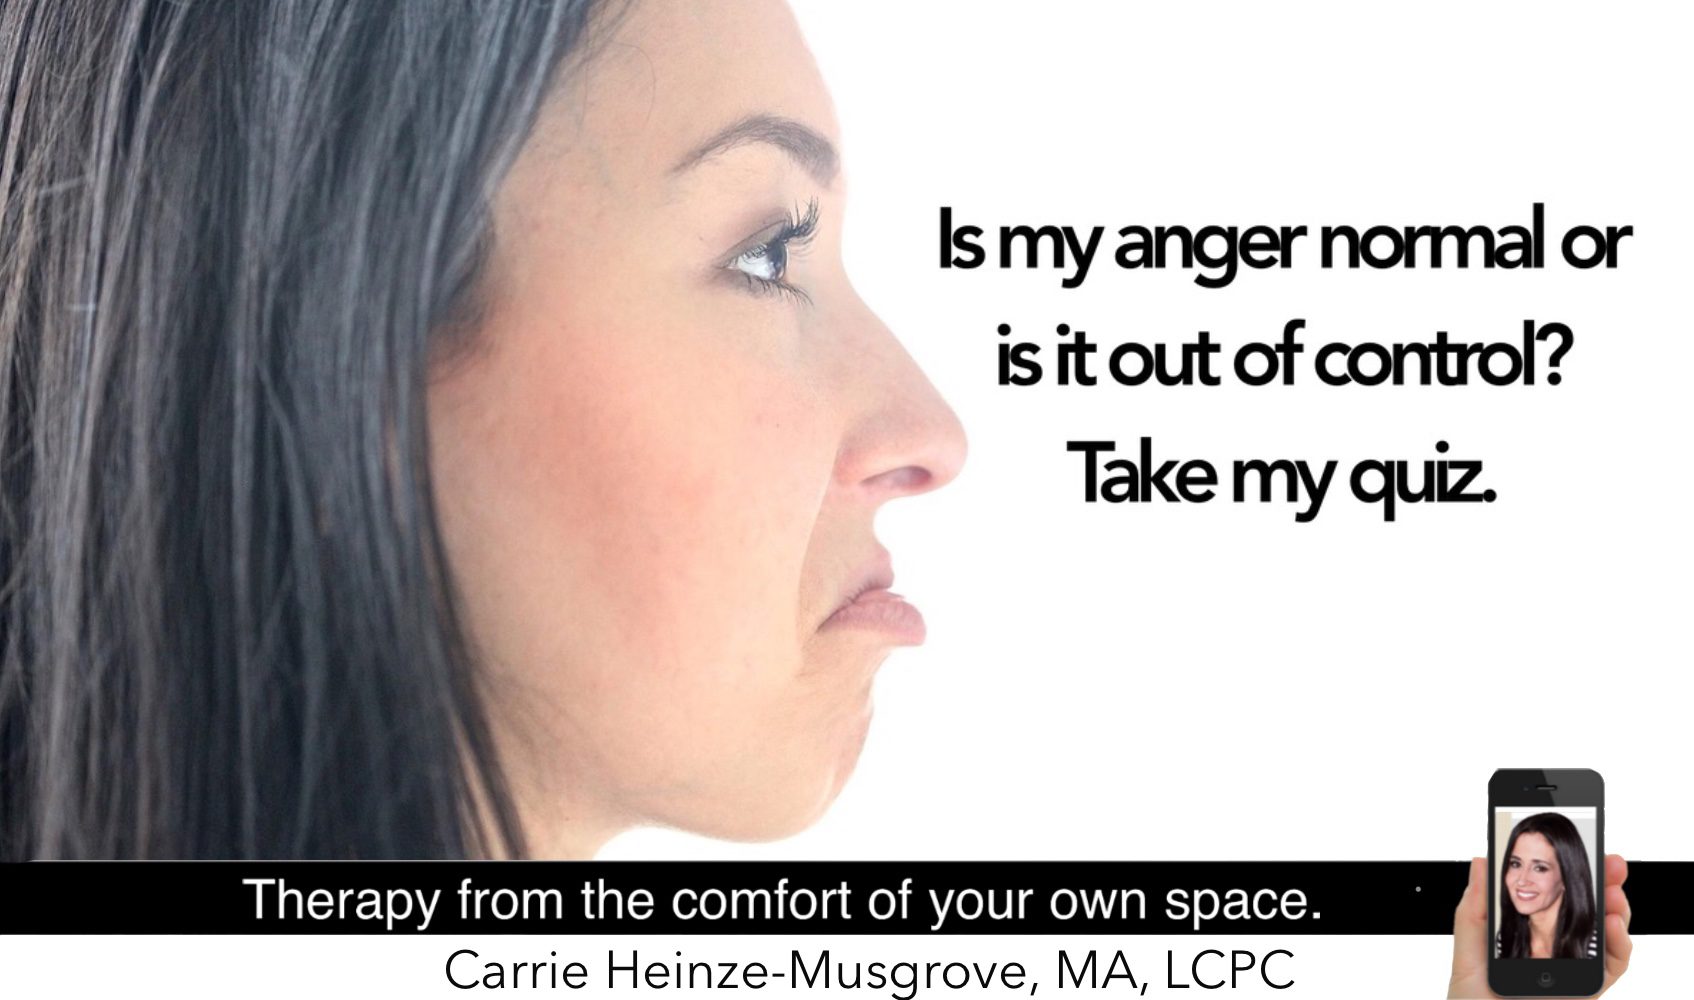 Is my anger out of control?